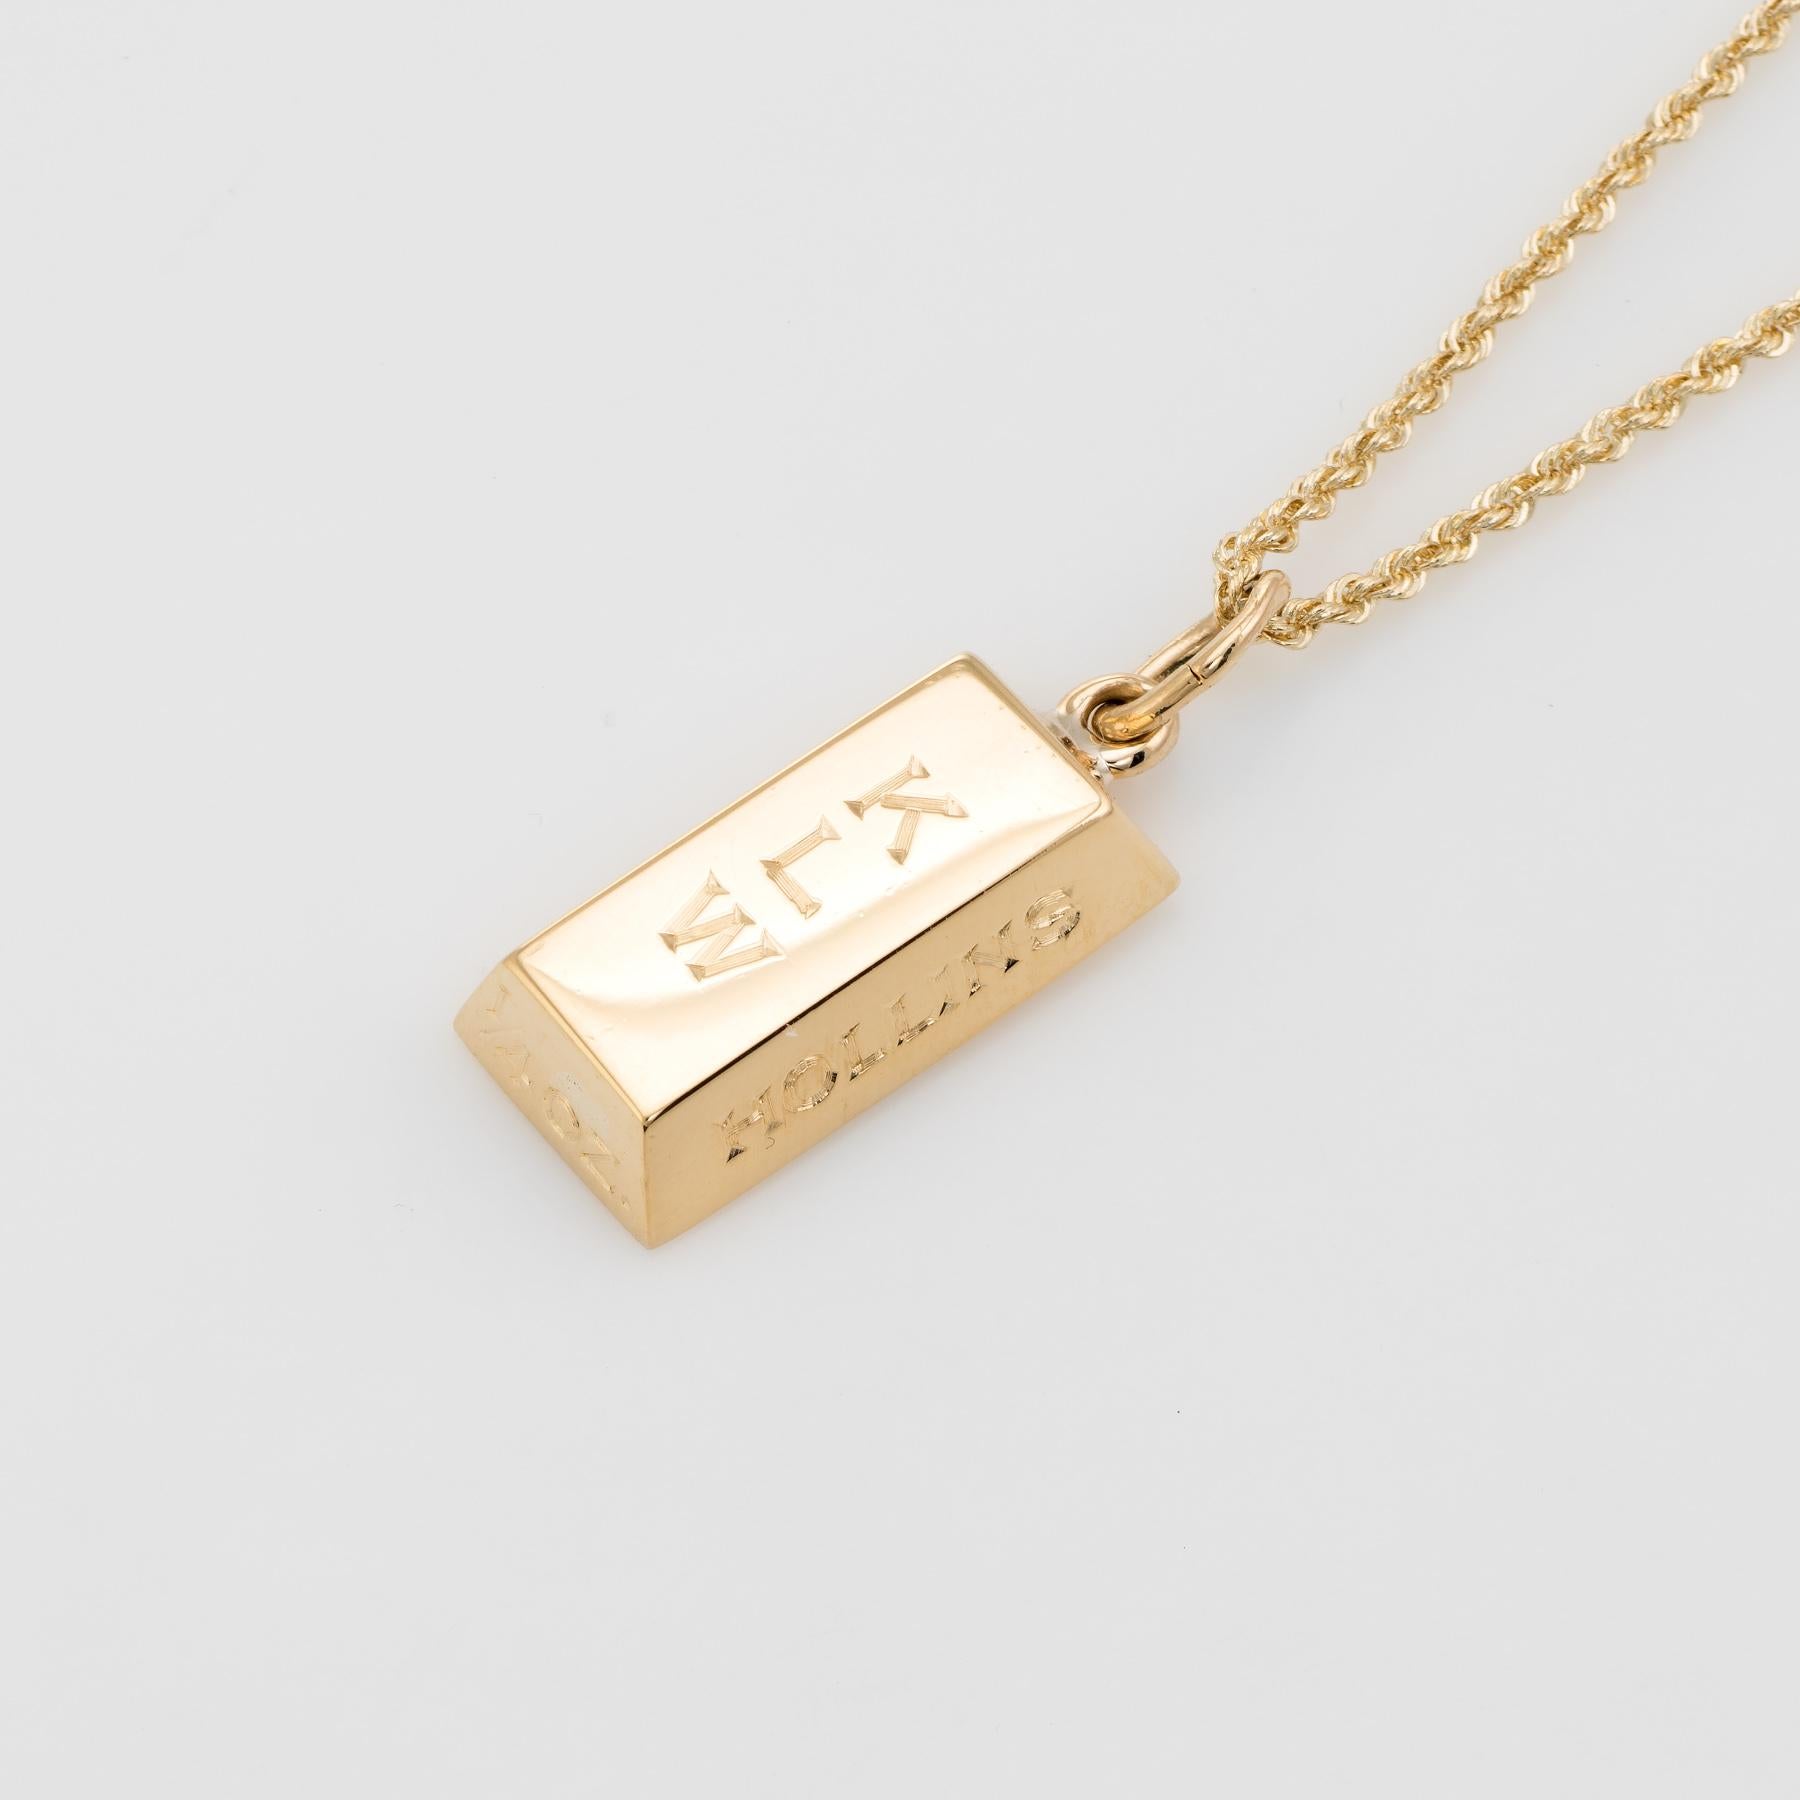 Stylish Cartier gold bar pendant or charm, crafted in 18 karat yellow gold. 

The solid three dimensional gold ingot can be worn as a pendant on a necklace or as a charm on a bracelet. The ingot is engraved 'KLW' and 'Hollins' along with the back of